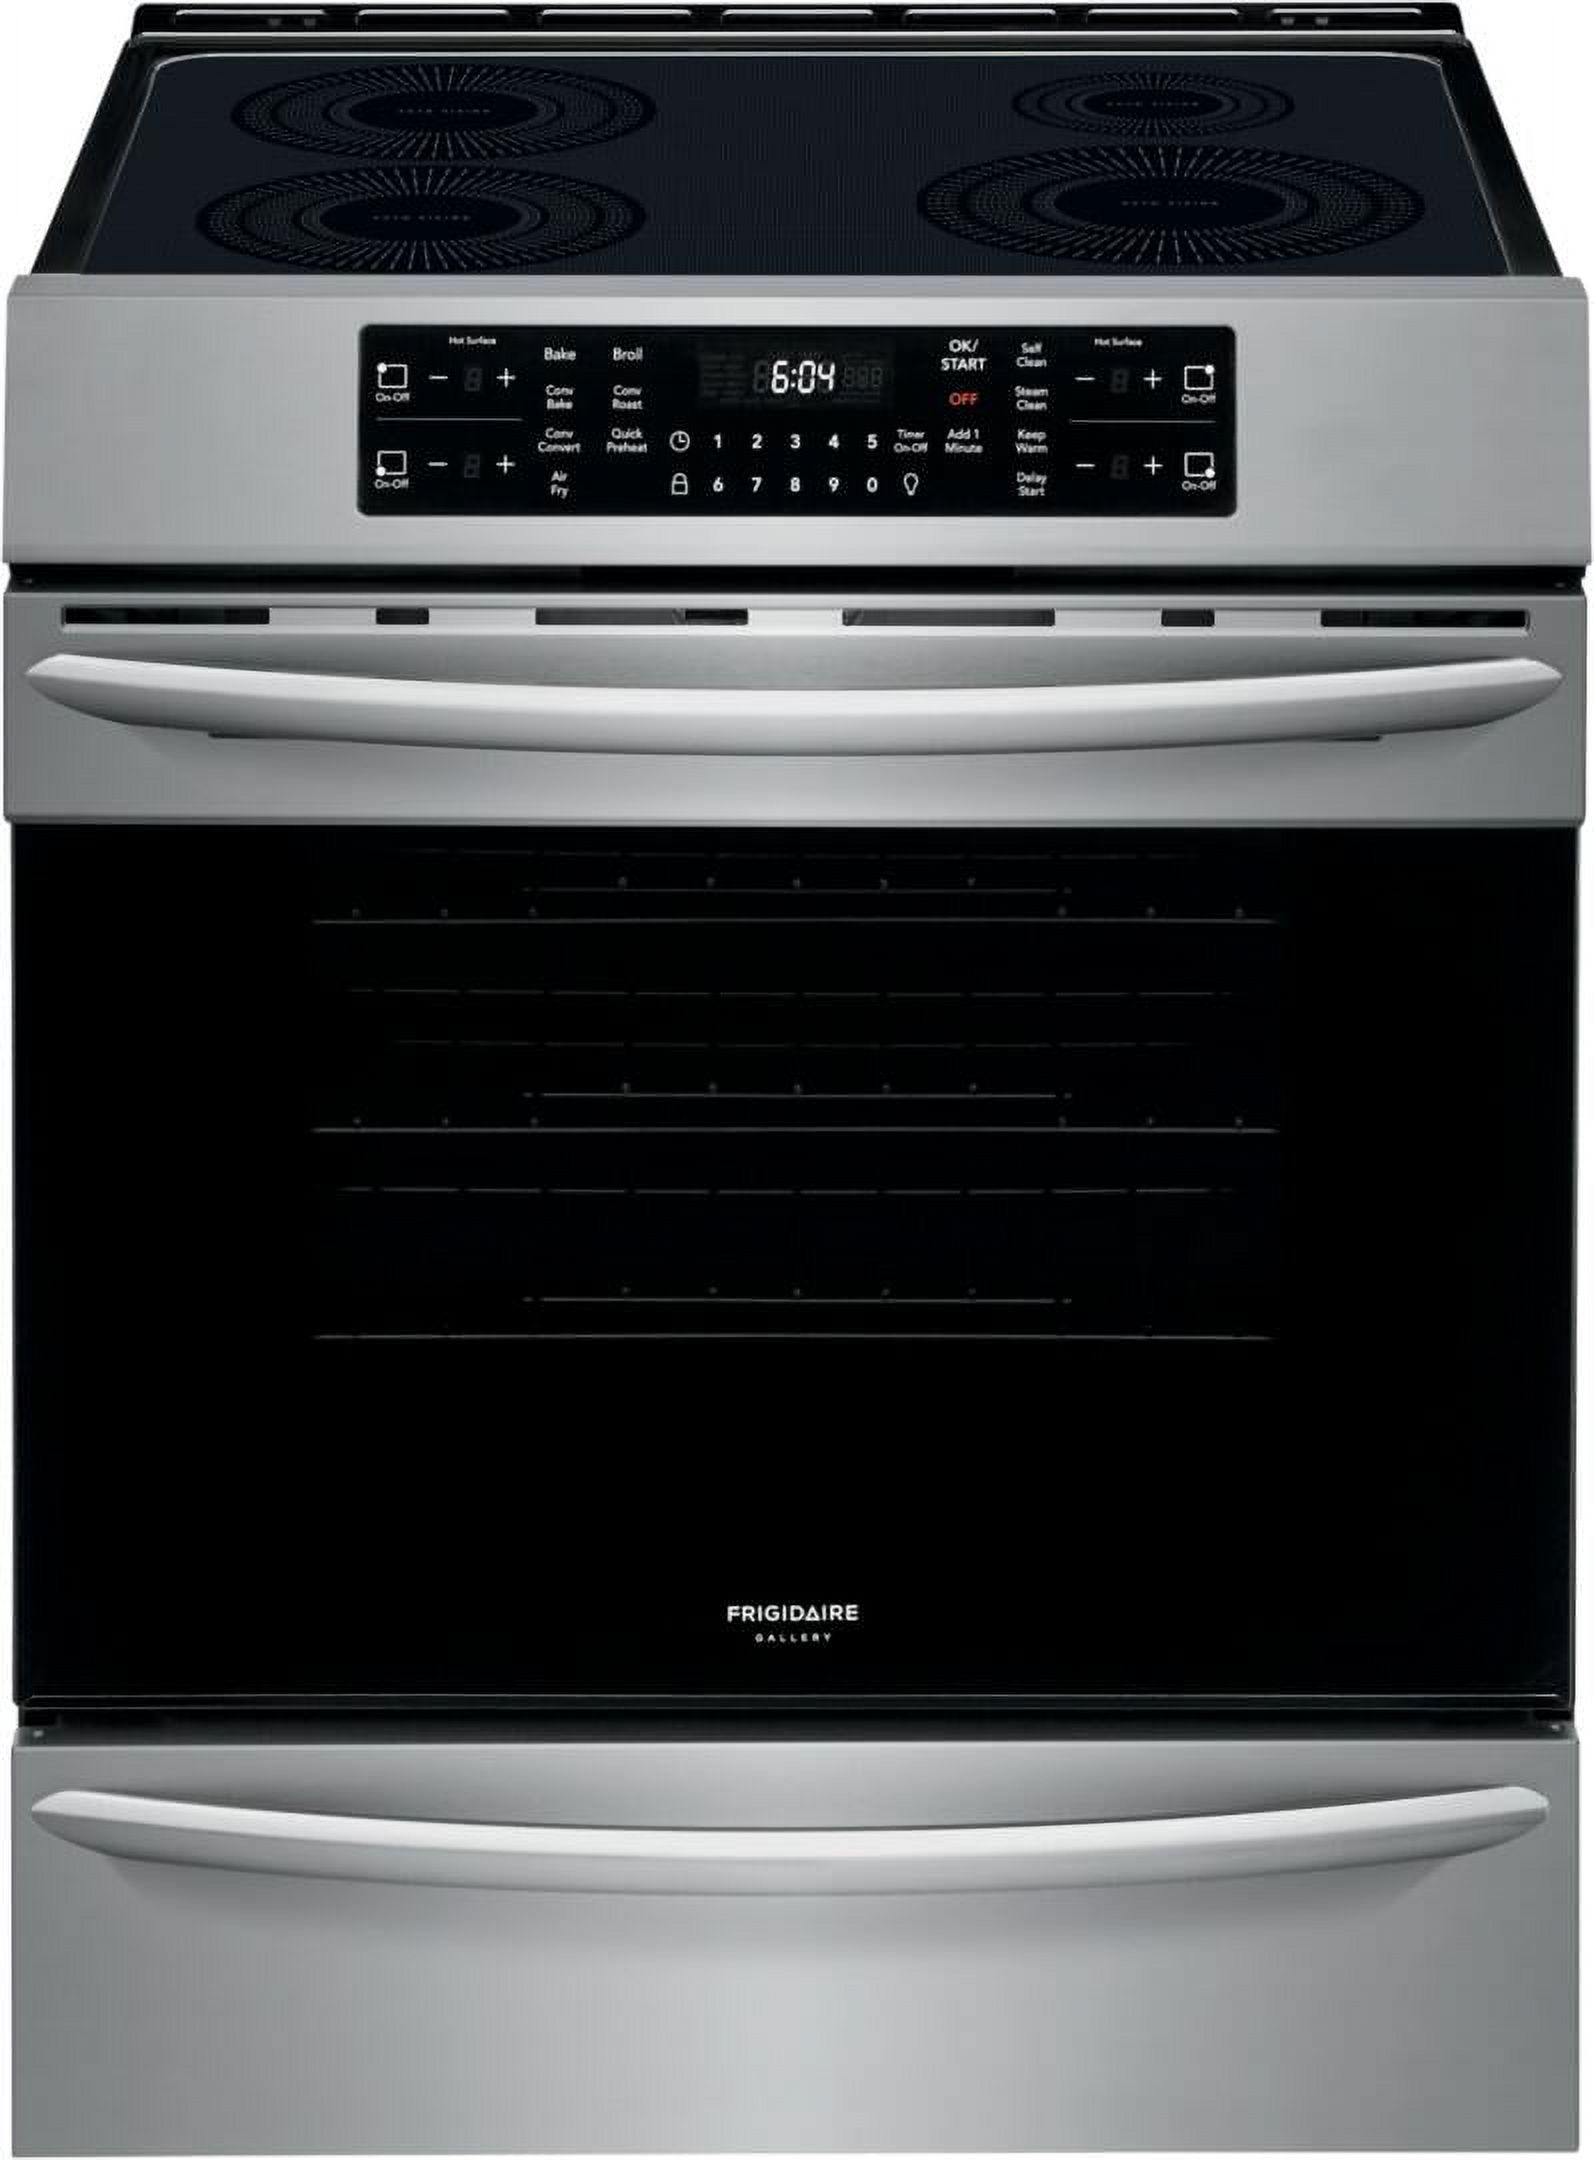 Frigidaire FGIH3047VF 30 Gallery Series Induction Range with Air Fry 4 Elements 5.4 cu. ft. Oven Capacity Self Clean with Steam Clean Option Star K ADA Compliant in Stainless Steel - image 3 of 15